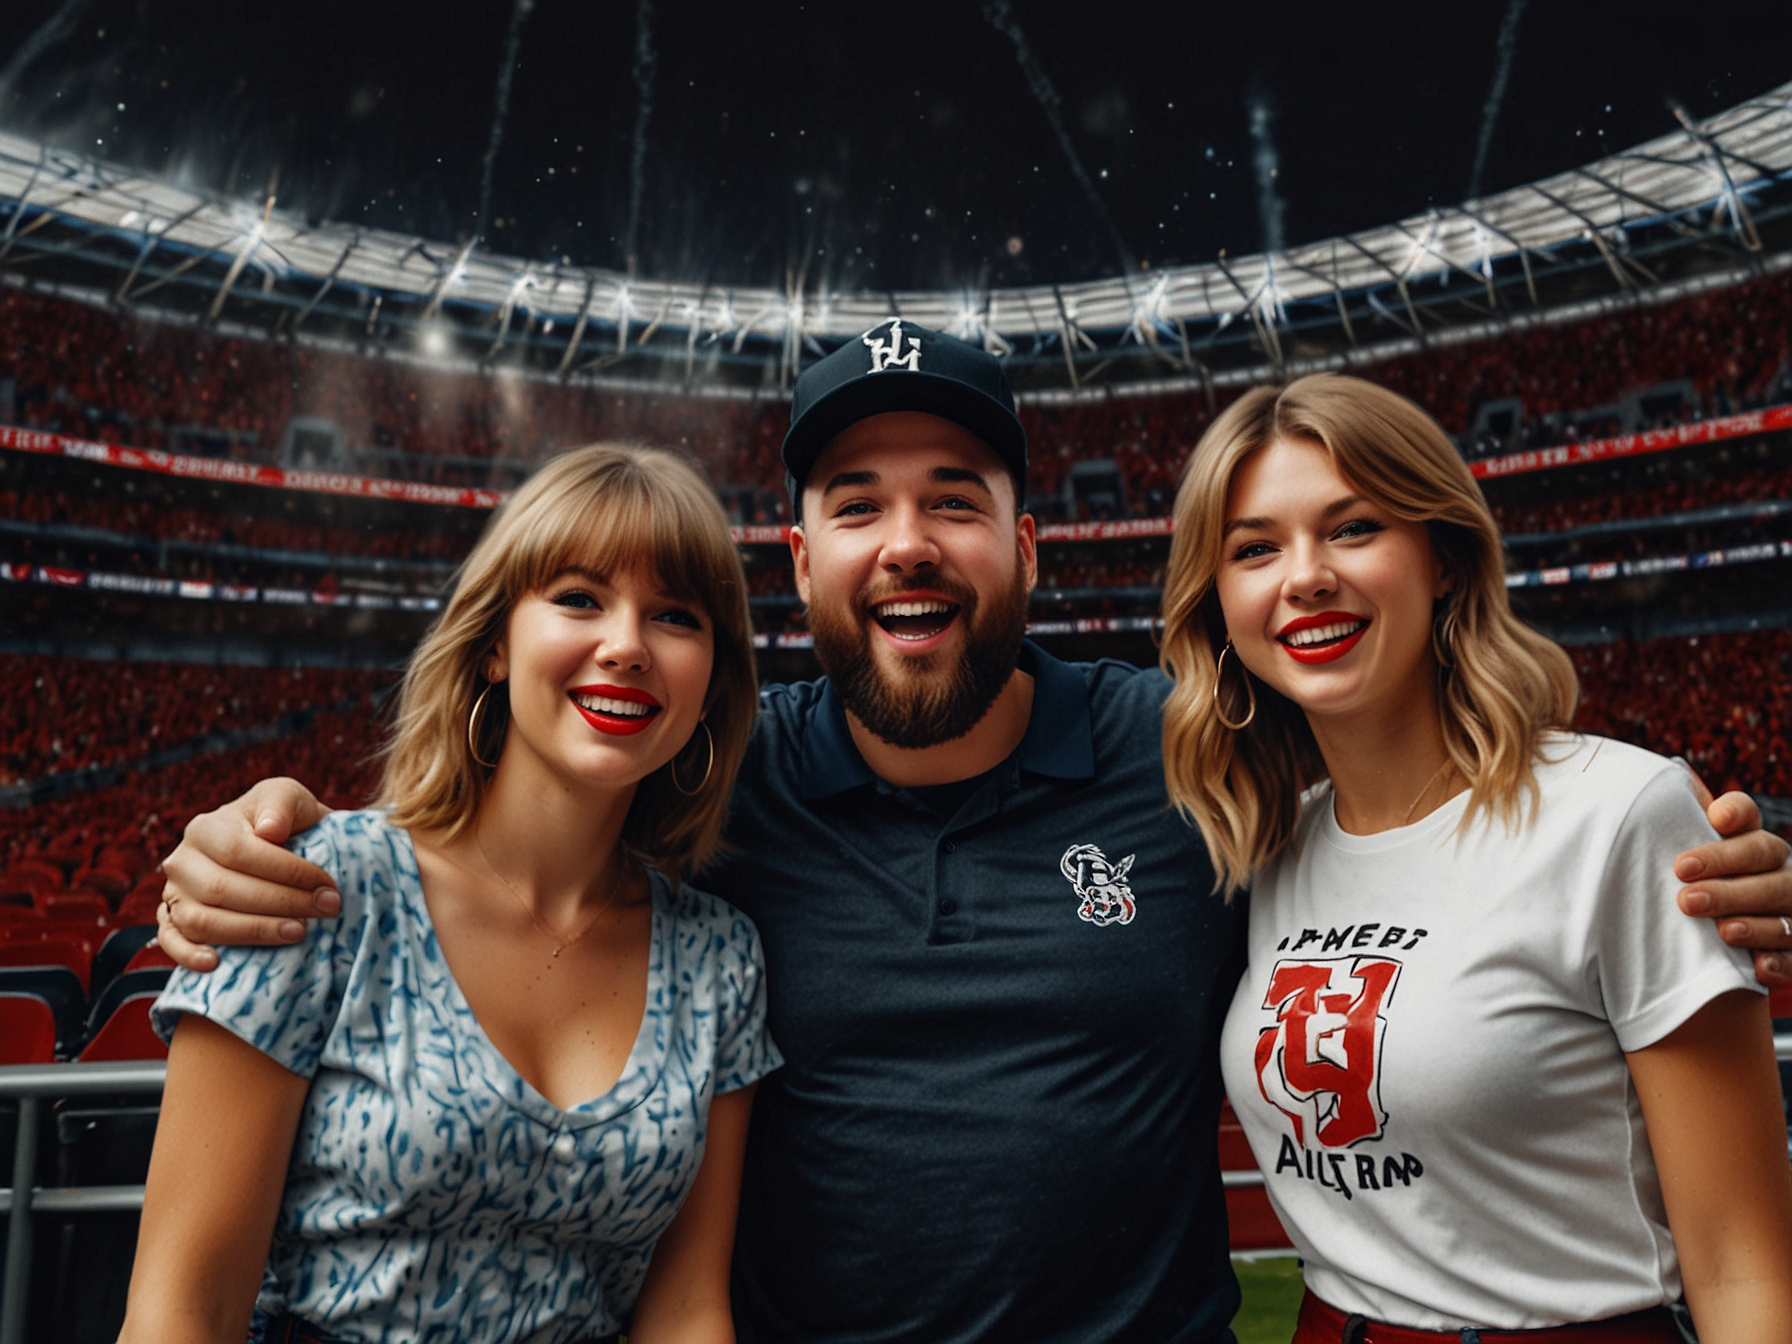 The Kelce family at Wembley Stadium, visibly excited and engaged, soaking in the vibrant atmosphere of Taylor Swift's Eras Tour with Jason donning official tour merchandise.